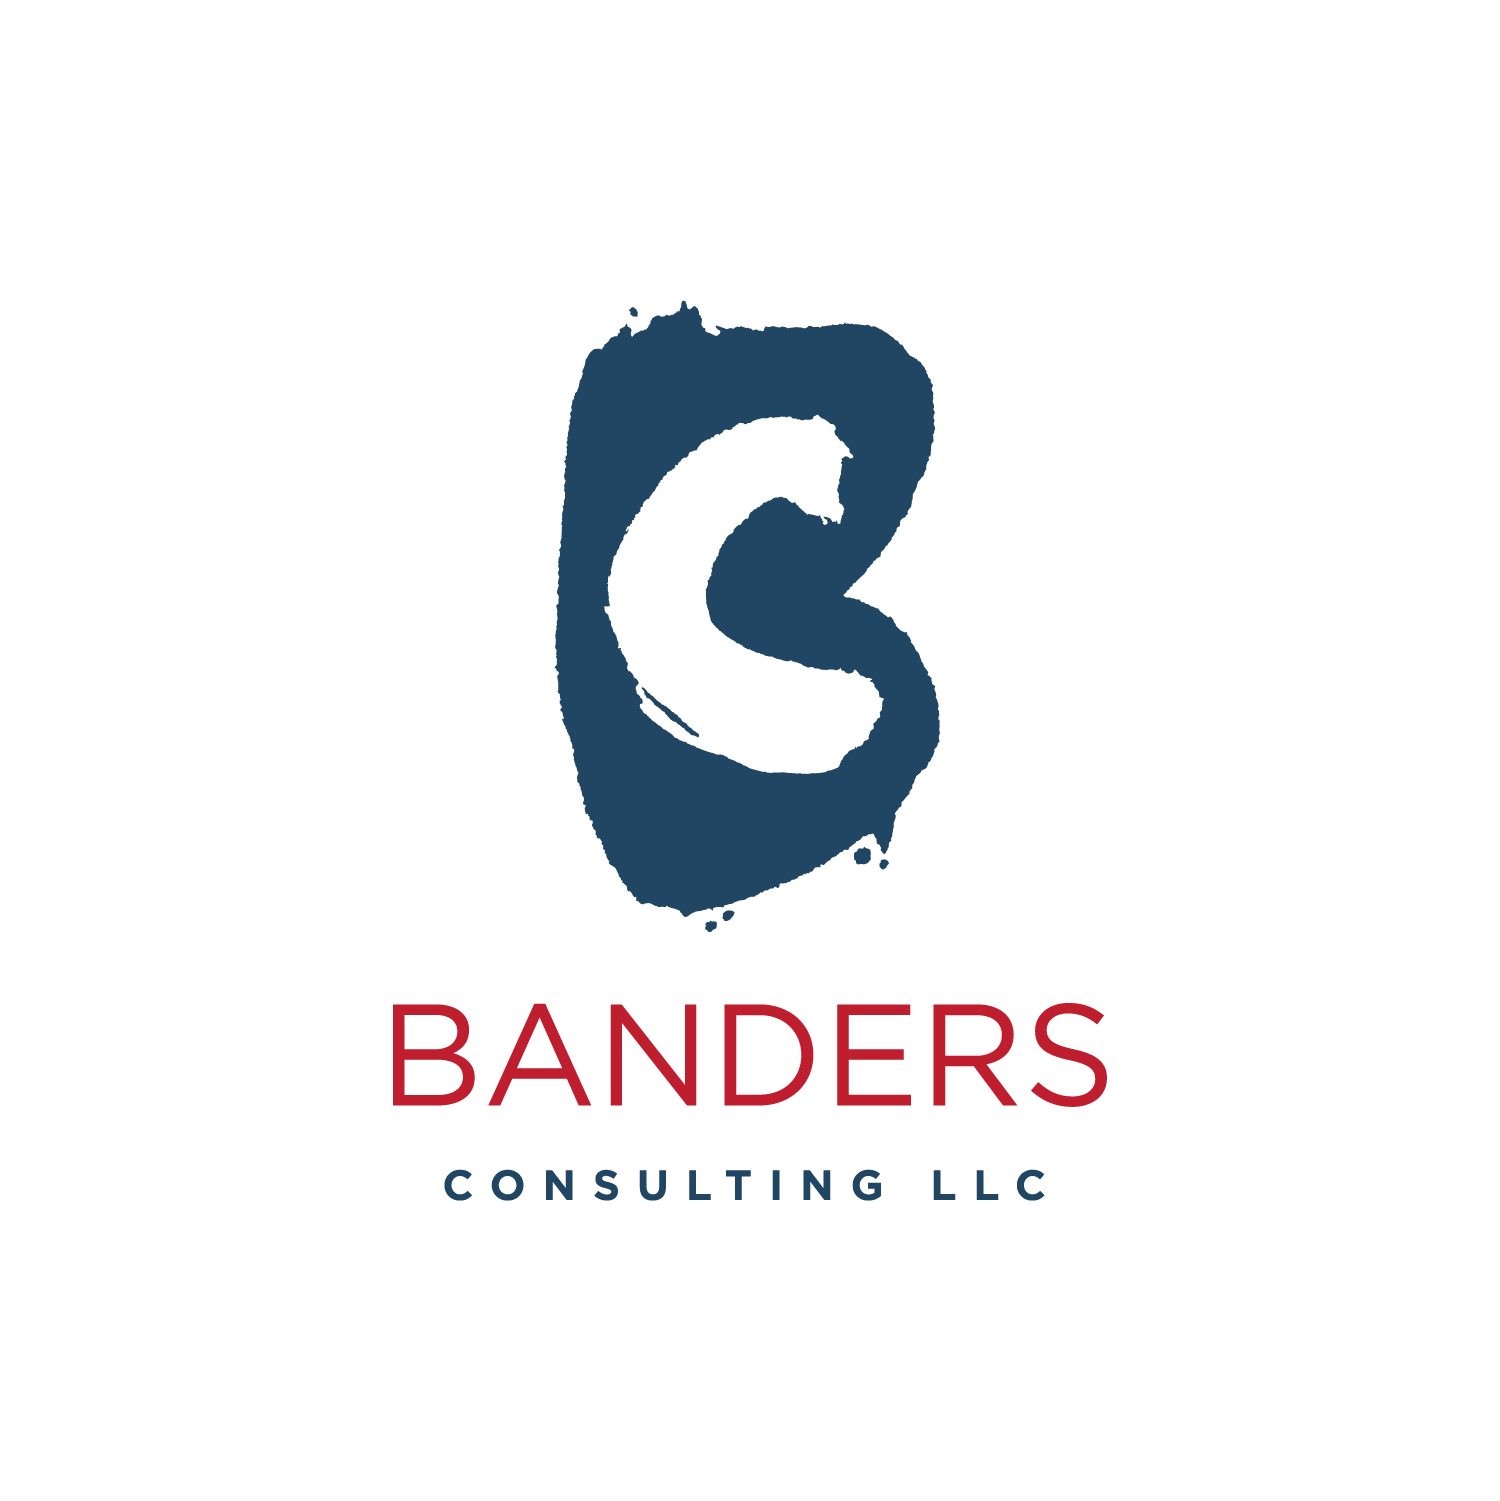 Banders Consulting logo by OLSON MCINTYRE